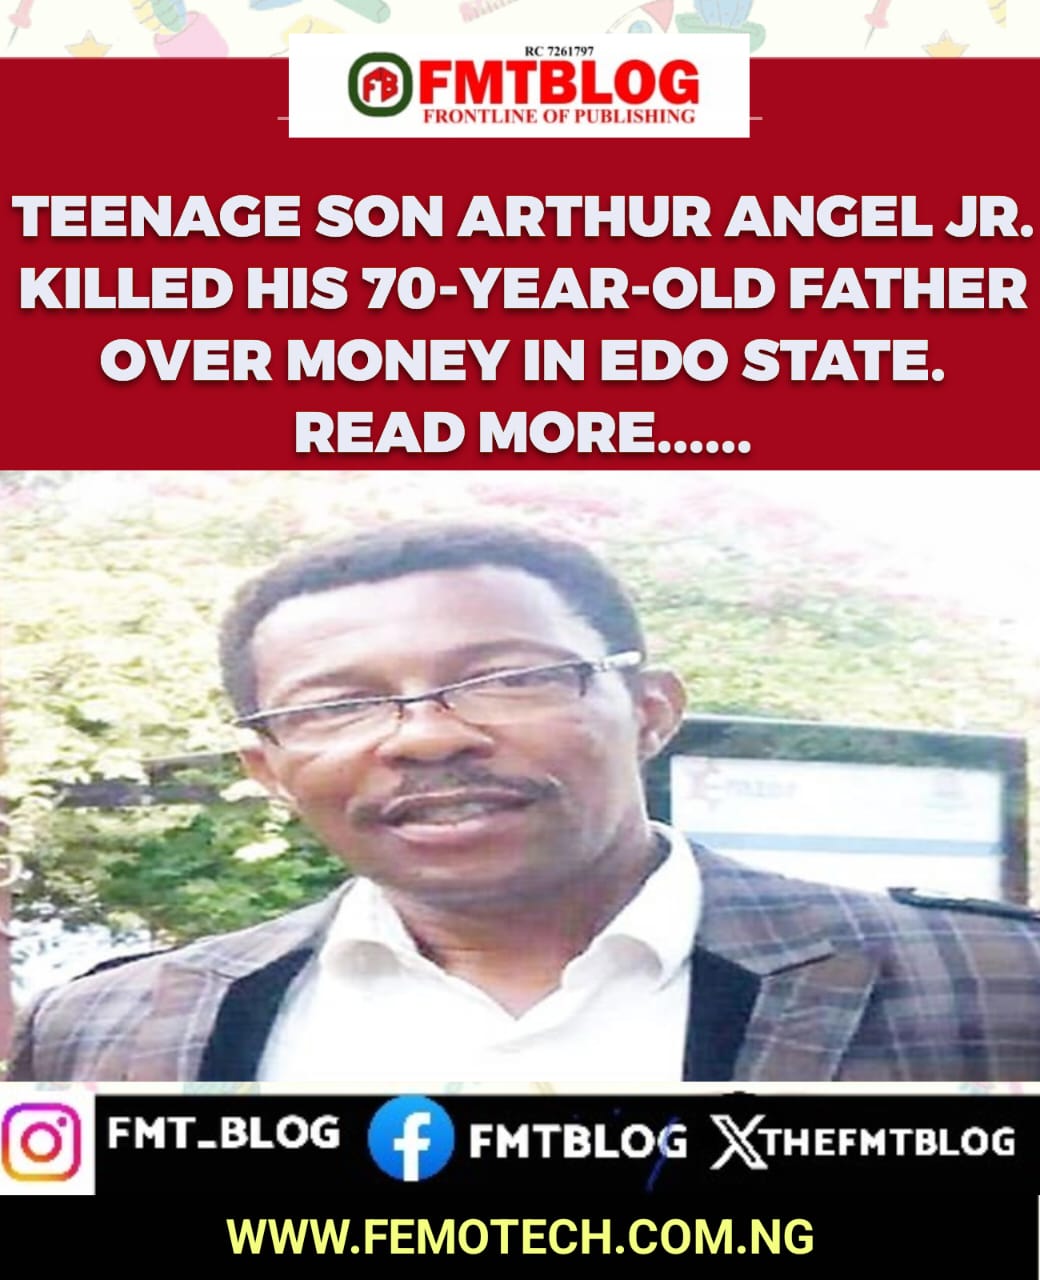 Teenage Boy Arthur Angel Jr. Killed His 70-Year-Old Father Over Money In Edo State.